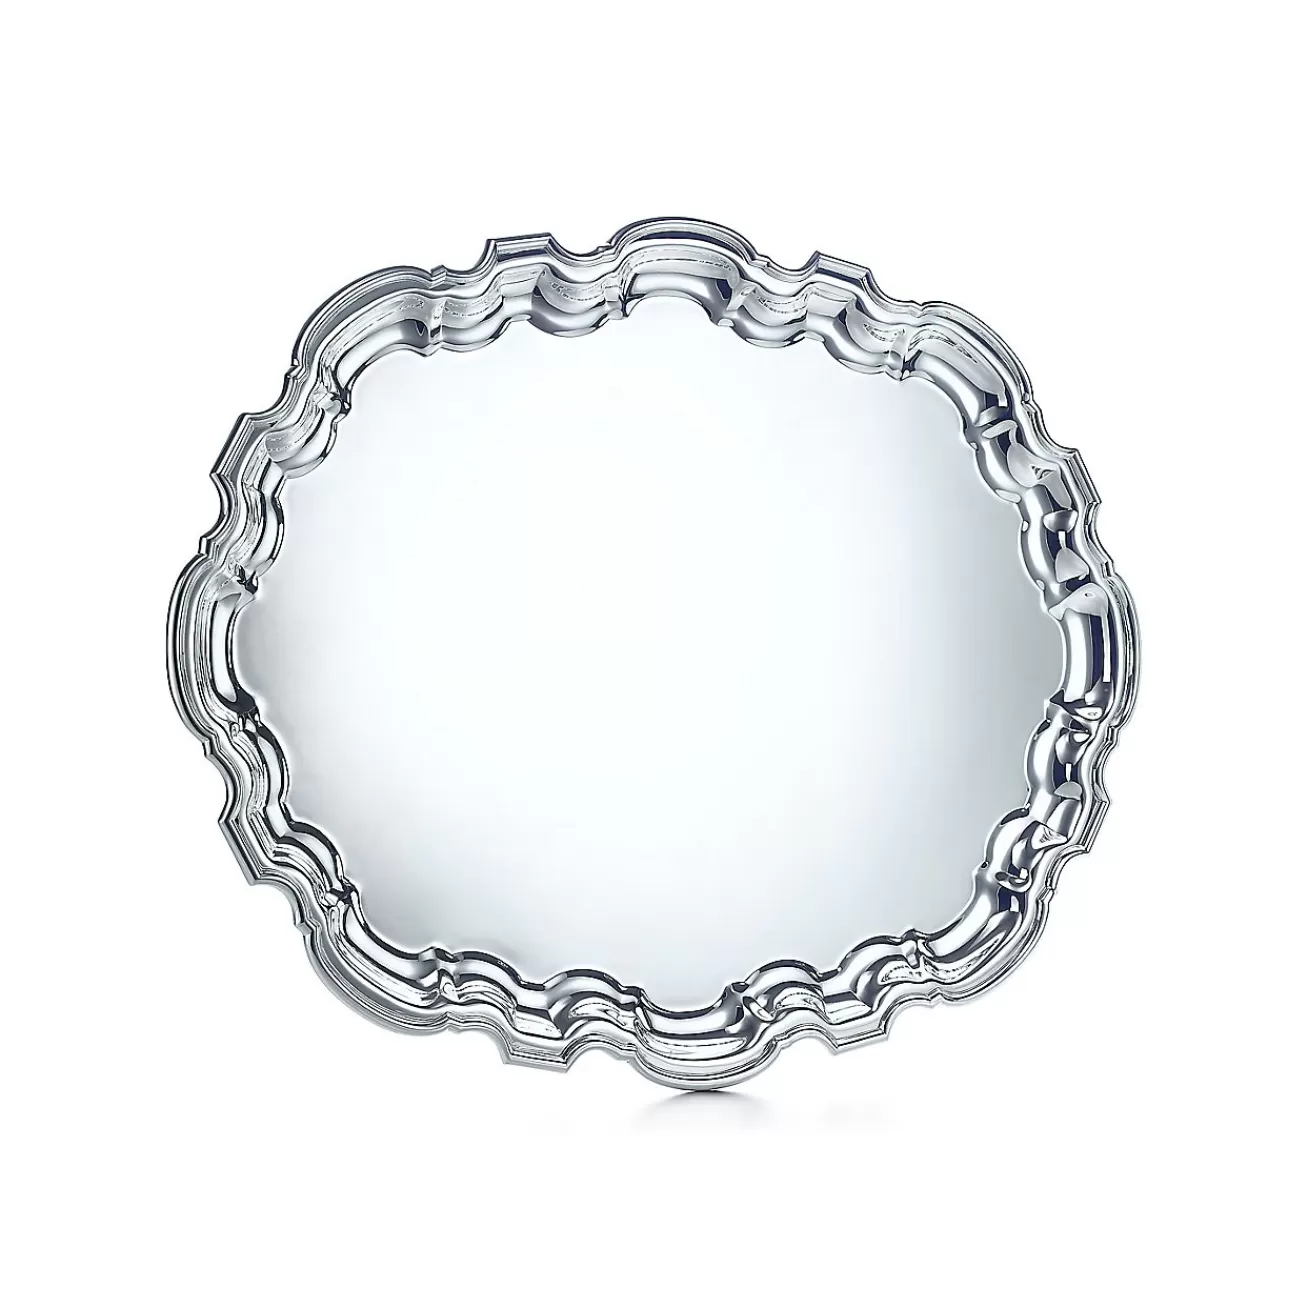 Tiffany & Co. Chippendale oval tray in sterling silver. | ^ Tableware | Flatware & Trays